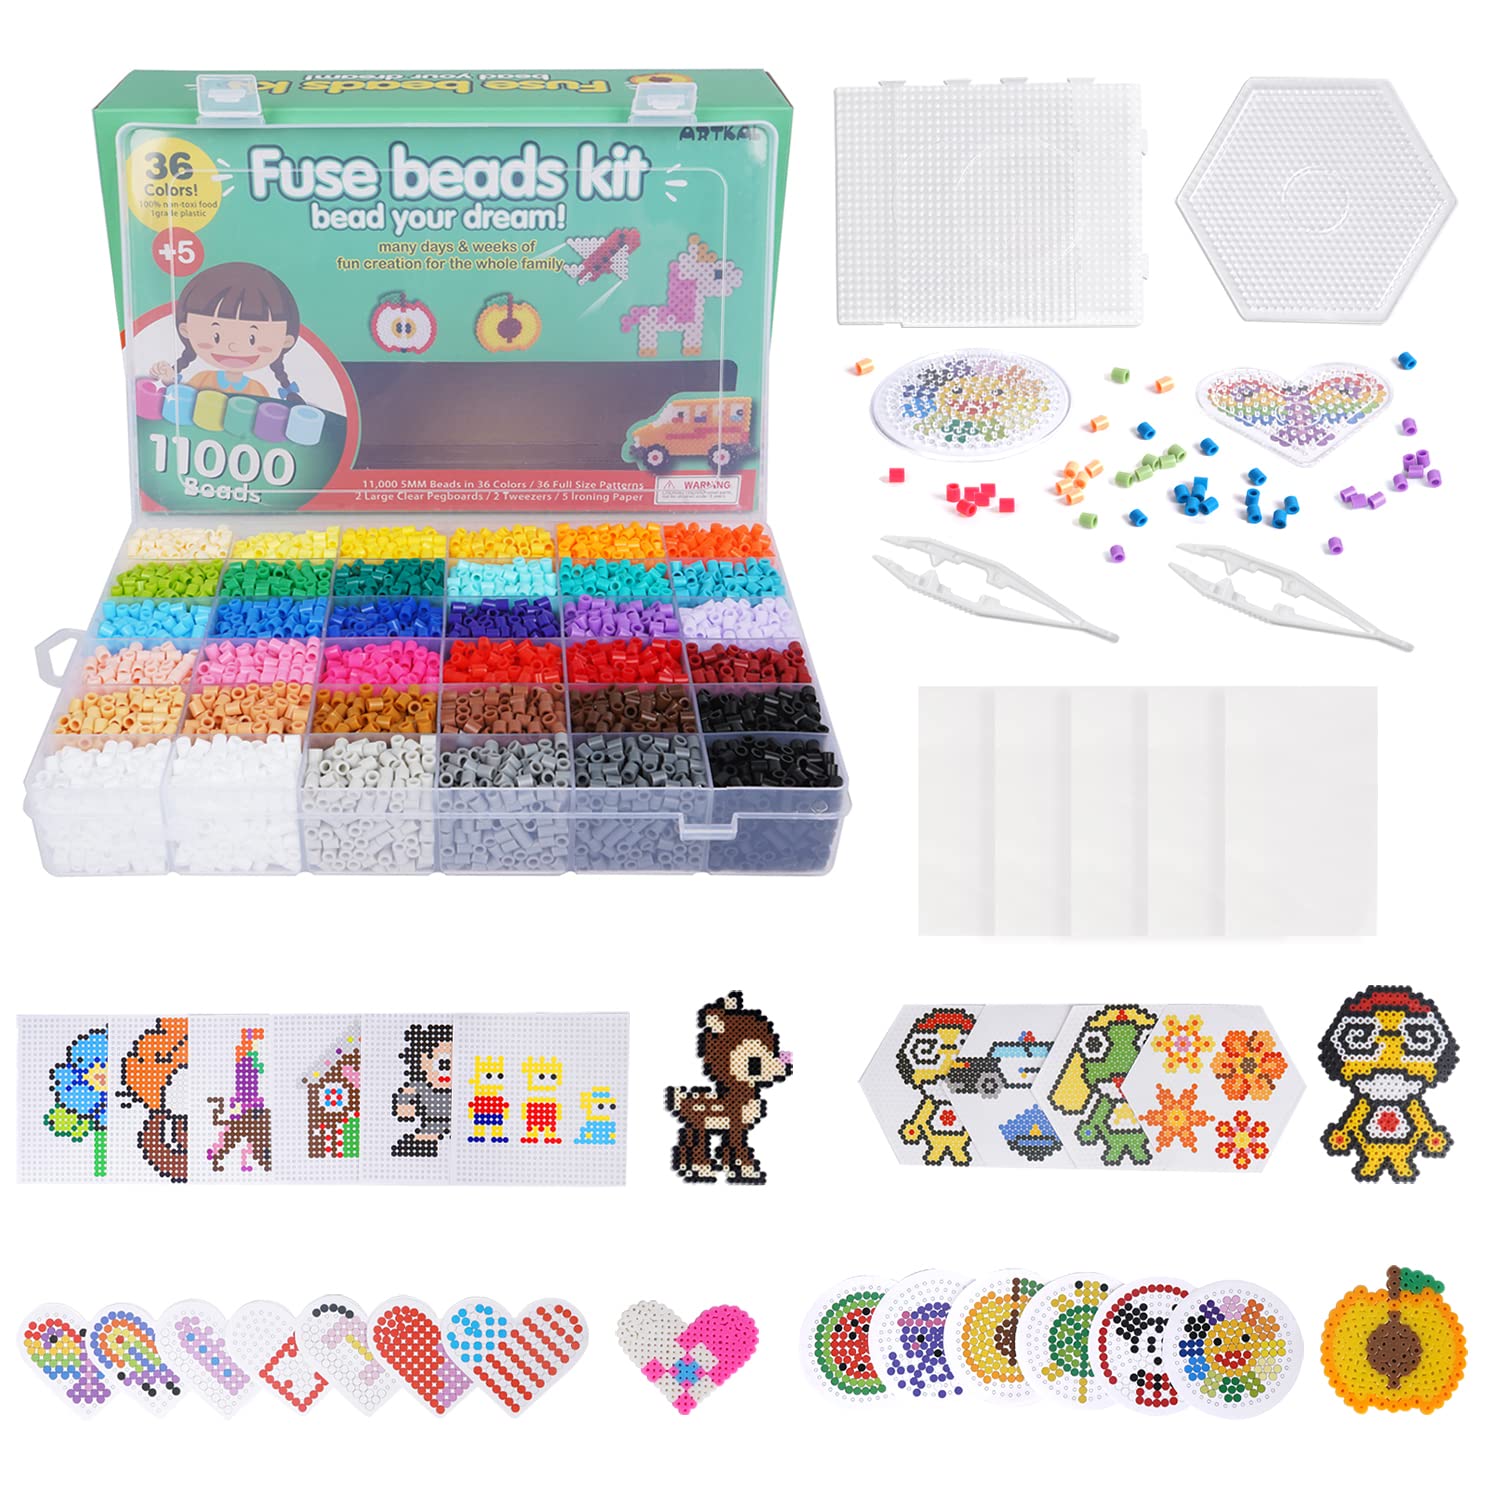 Artkal Fusion Beads Kit 11000 36 Colors Melting Beads Kit with 5